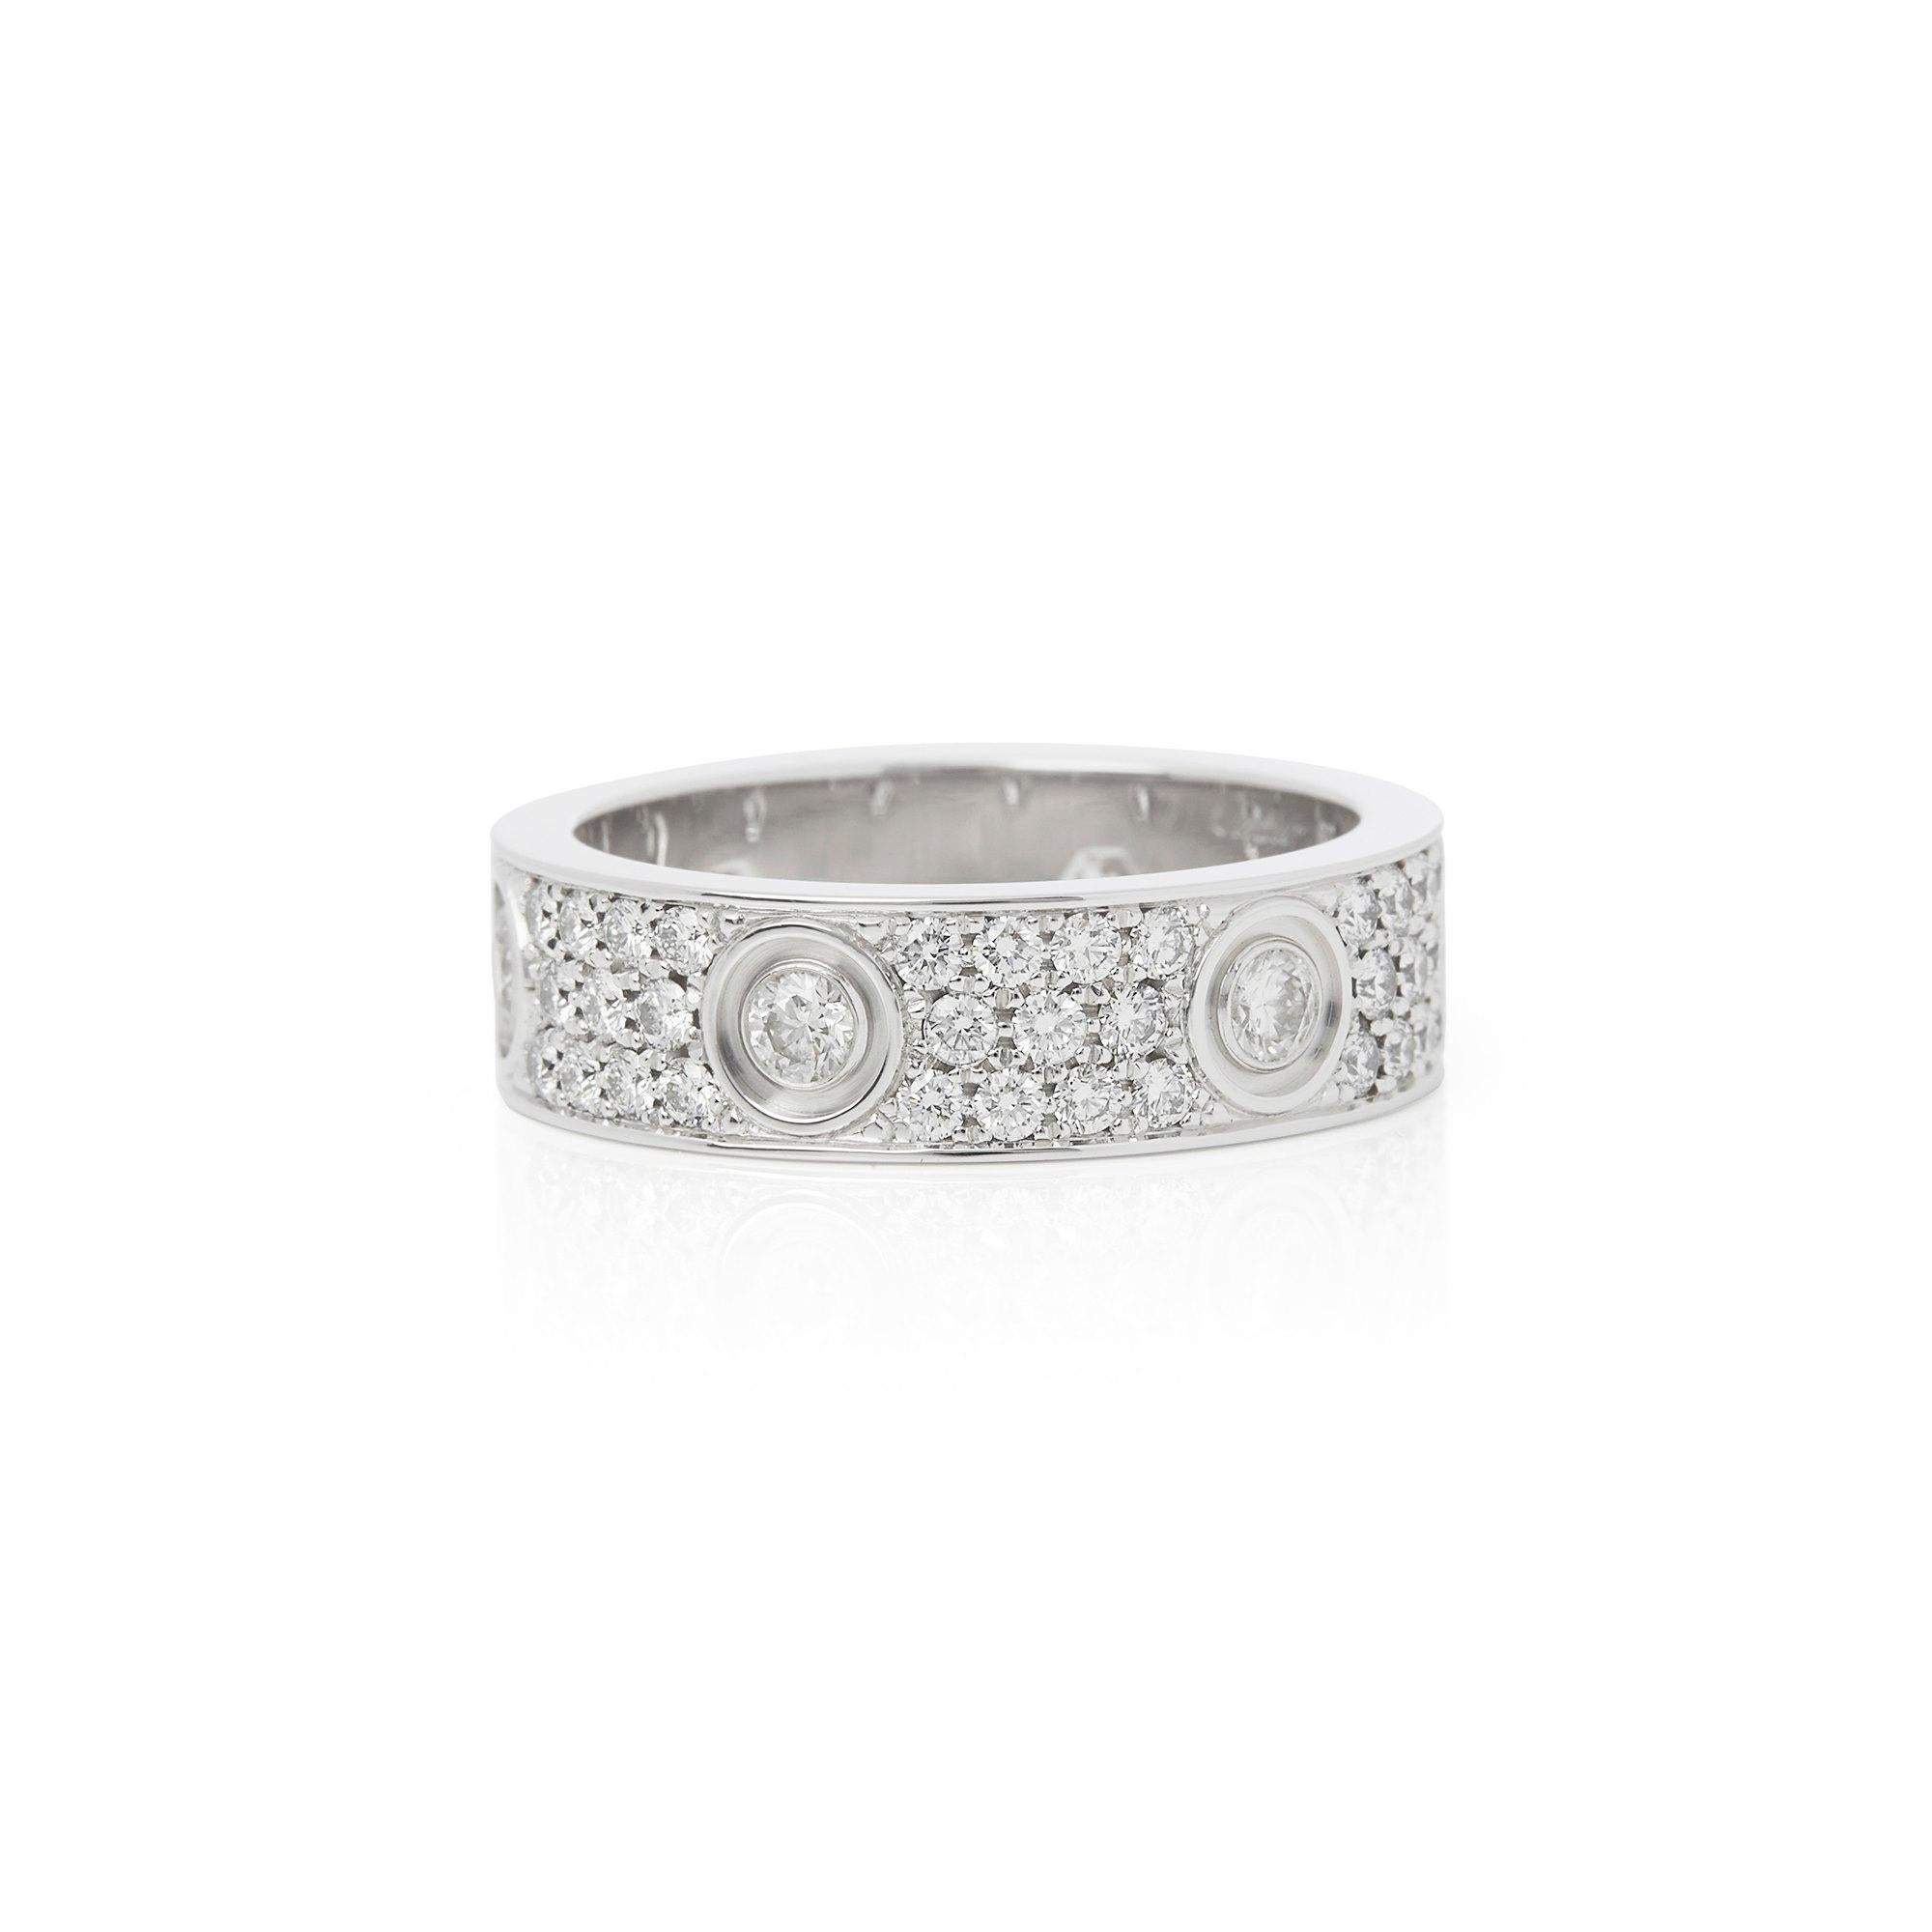 This Ring by Cartier is from their Signature Love collection and features Six Round Brilliant Cut Diamonds intermittently set with Sixty Six Round Brilliant Cut Diamonds Pave set in between them. Mounted in an 18k White Gold. Finger Size UK R 1/2,